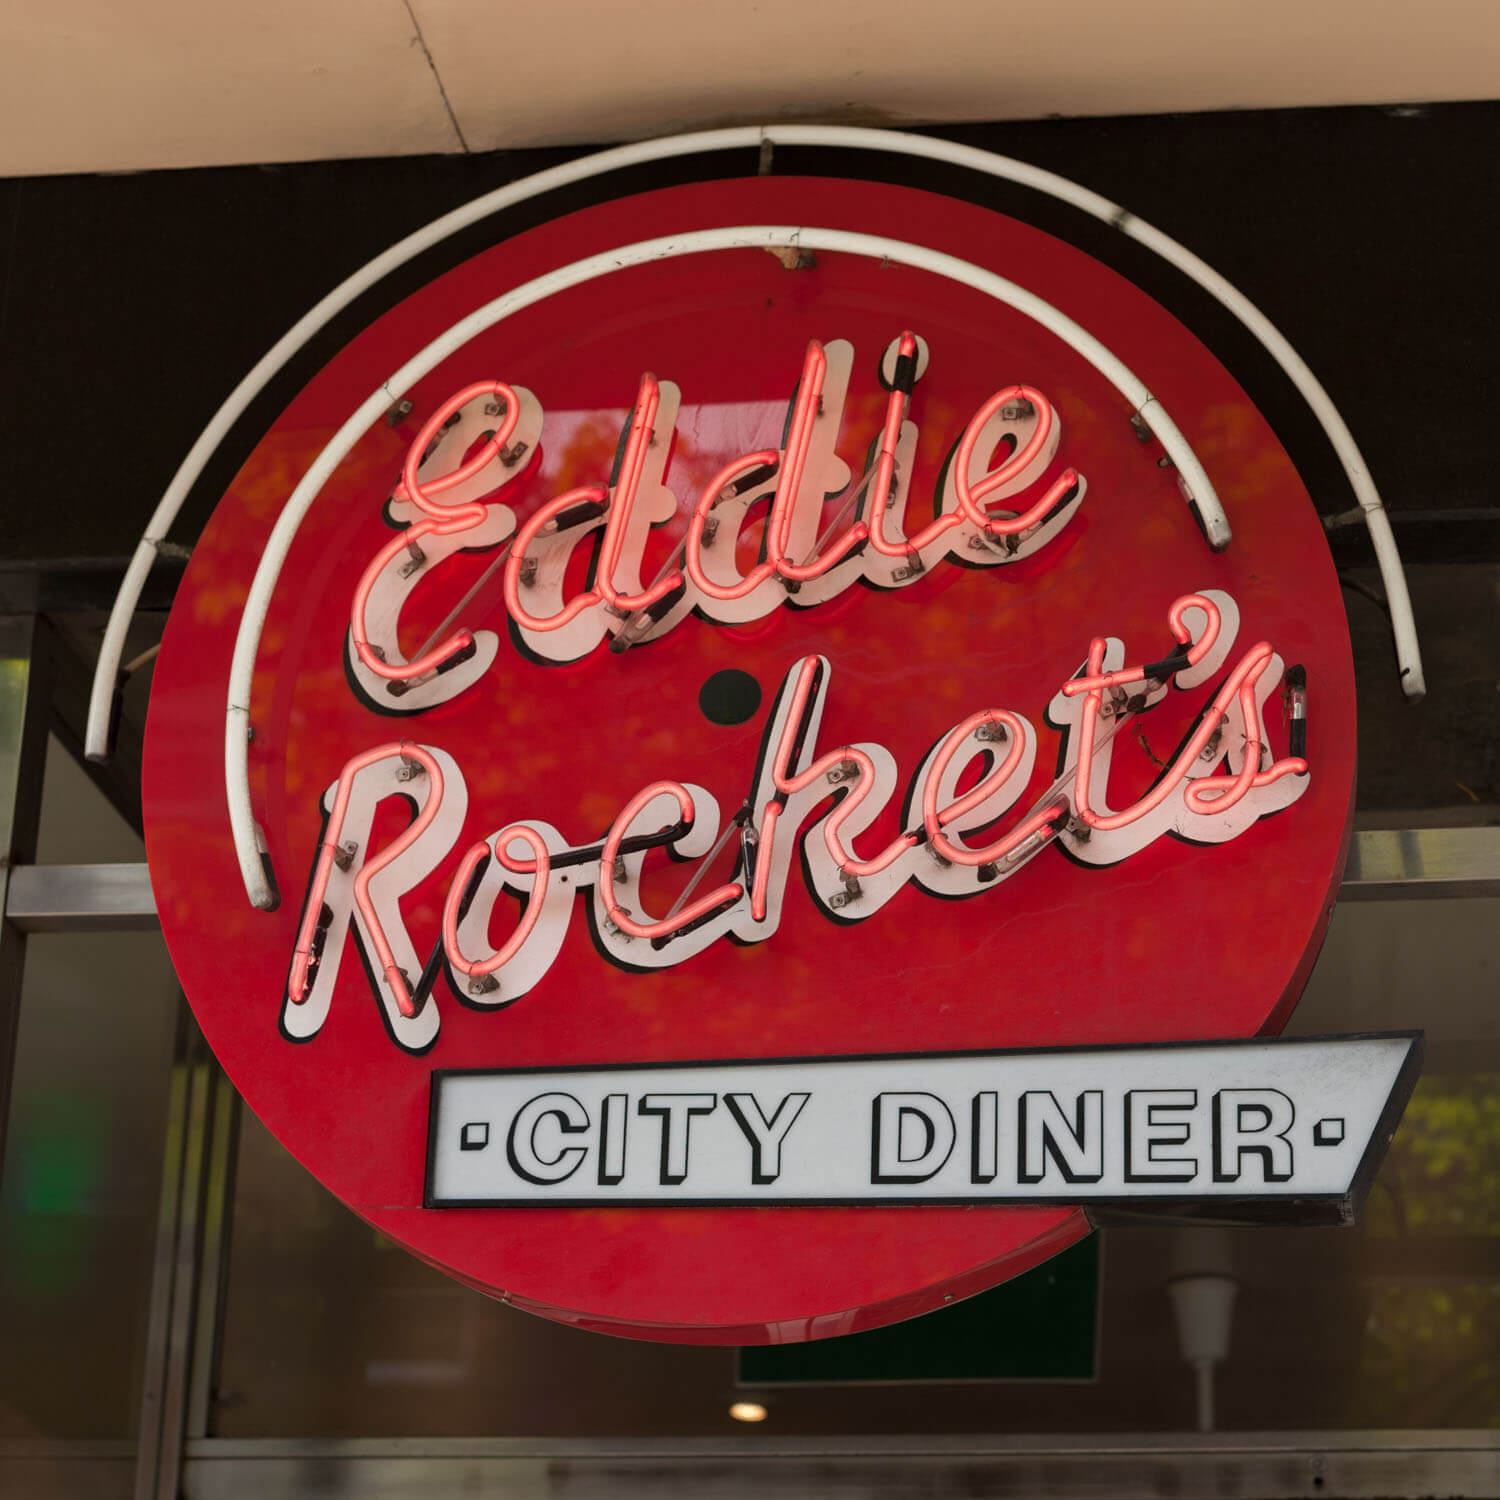 City Diner - Another example of how a round subject fits naturally into a square frame